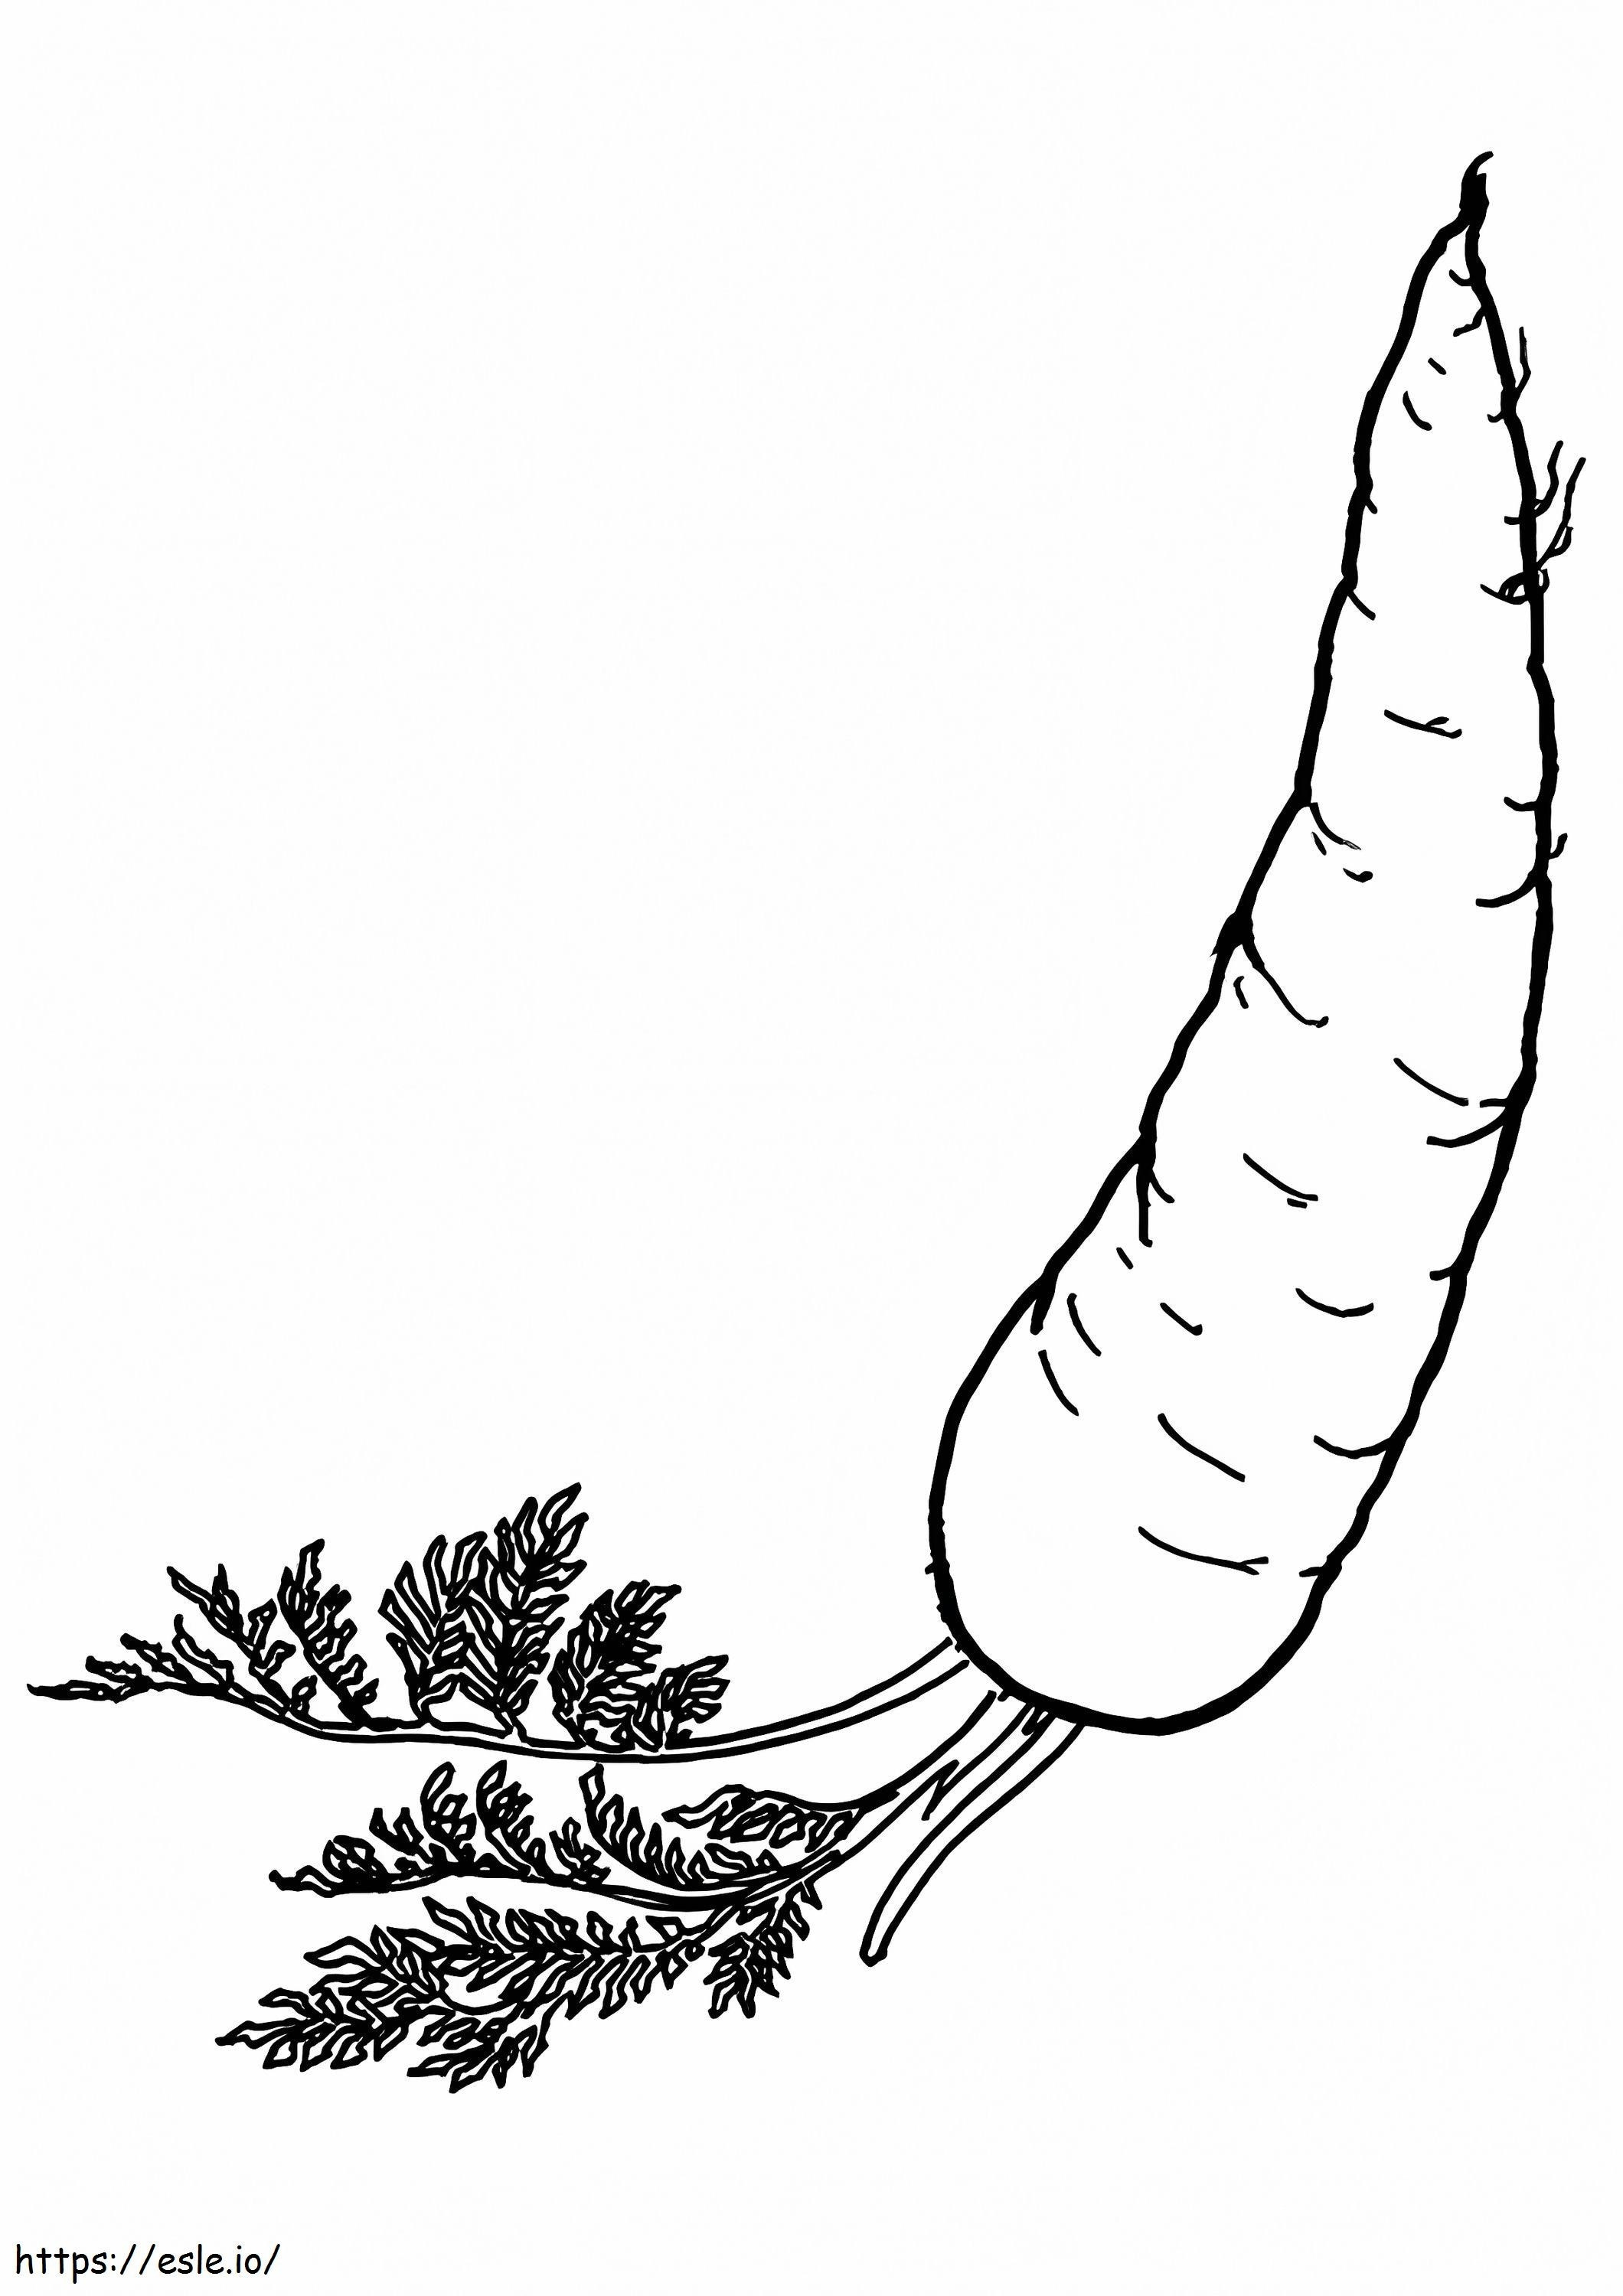 1528362796 The Carrots Are Orange A4 coloring page